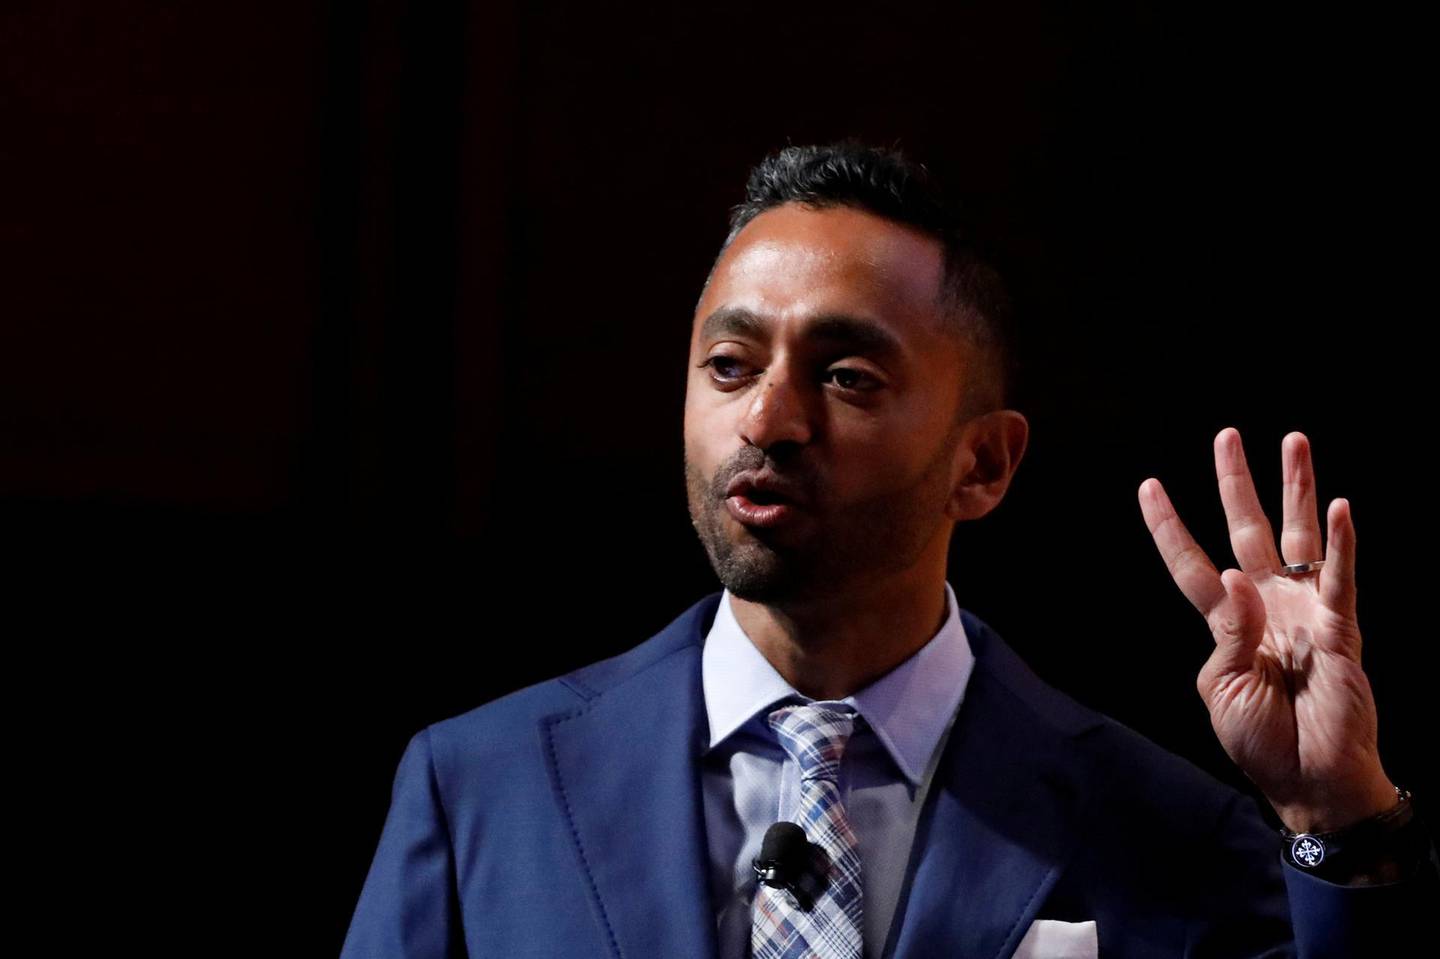 FILE PHOTO: Chamath Palihapitiya, founder and CEO of Social Capital, speaks during the Sohn Investment Conference in New York City, U.S., May 8, 2017. REUTERS/Brendan McDermid/File Photo